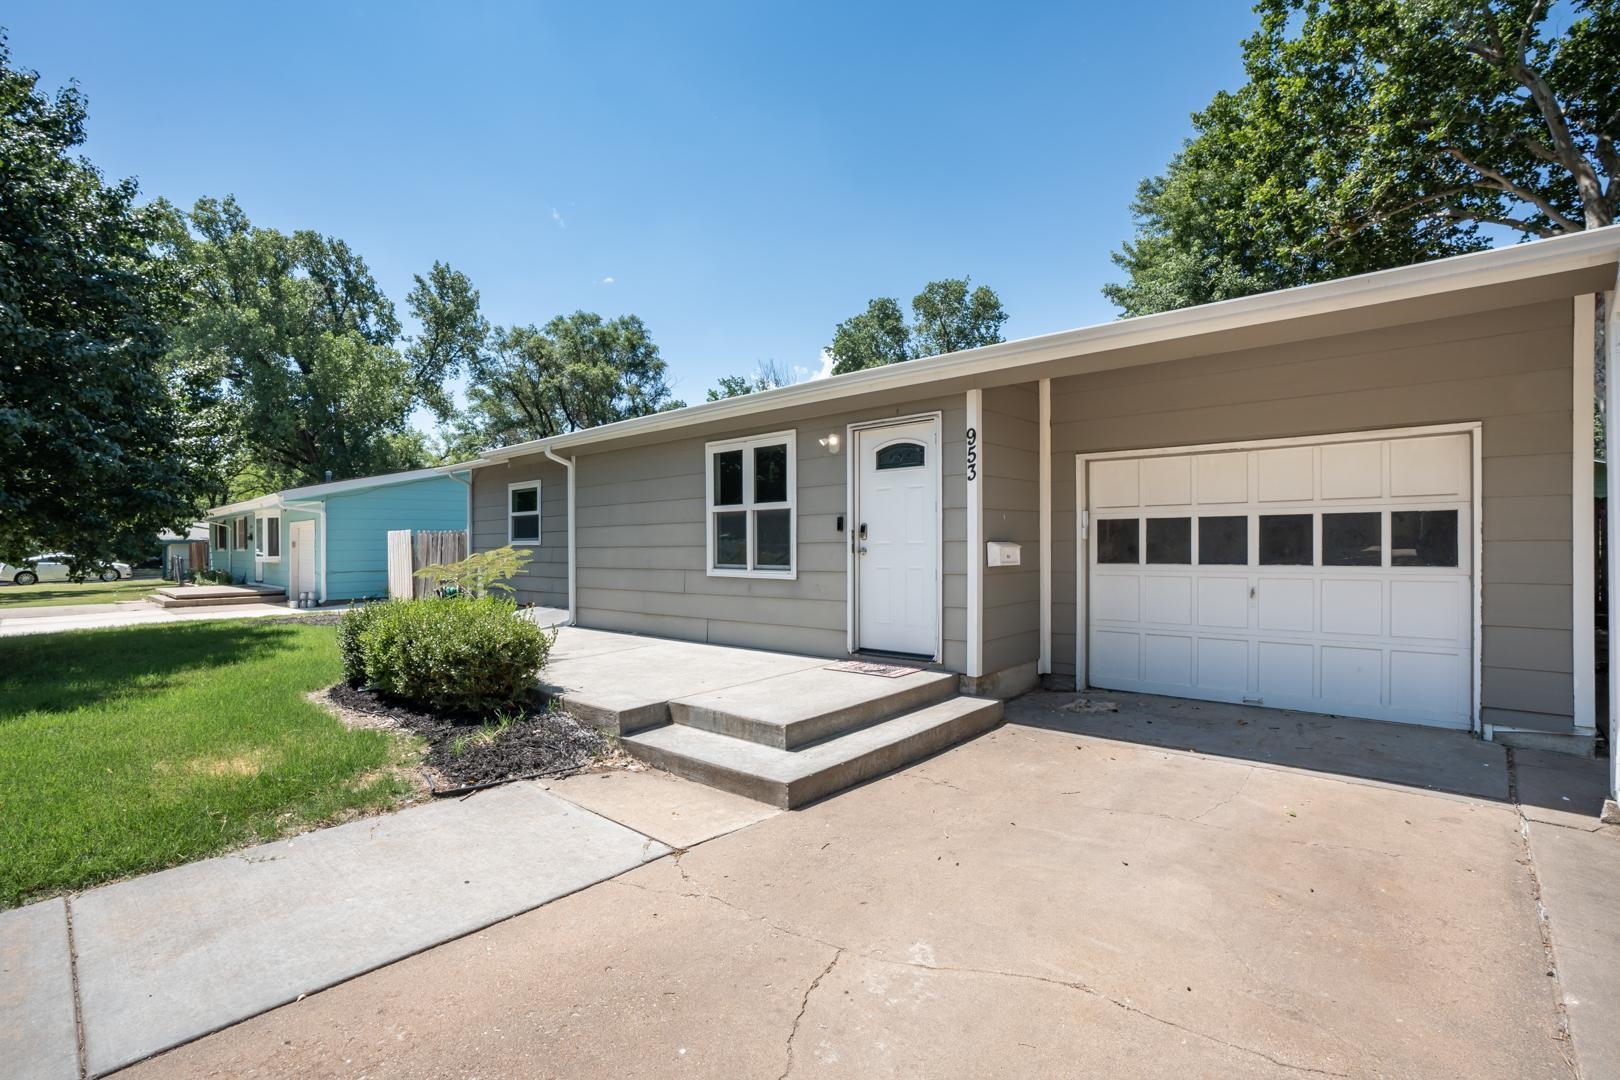 Conveniently located near Tyler and Central, this beautifully remodeled 4 bedroom, 3 bathroom home i